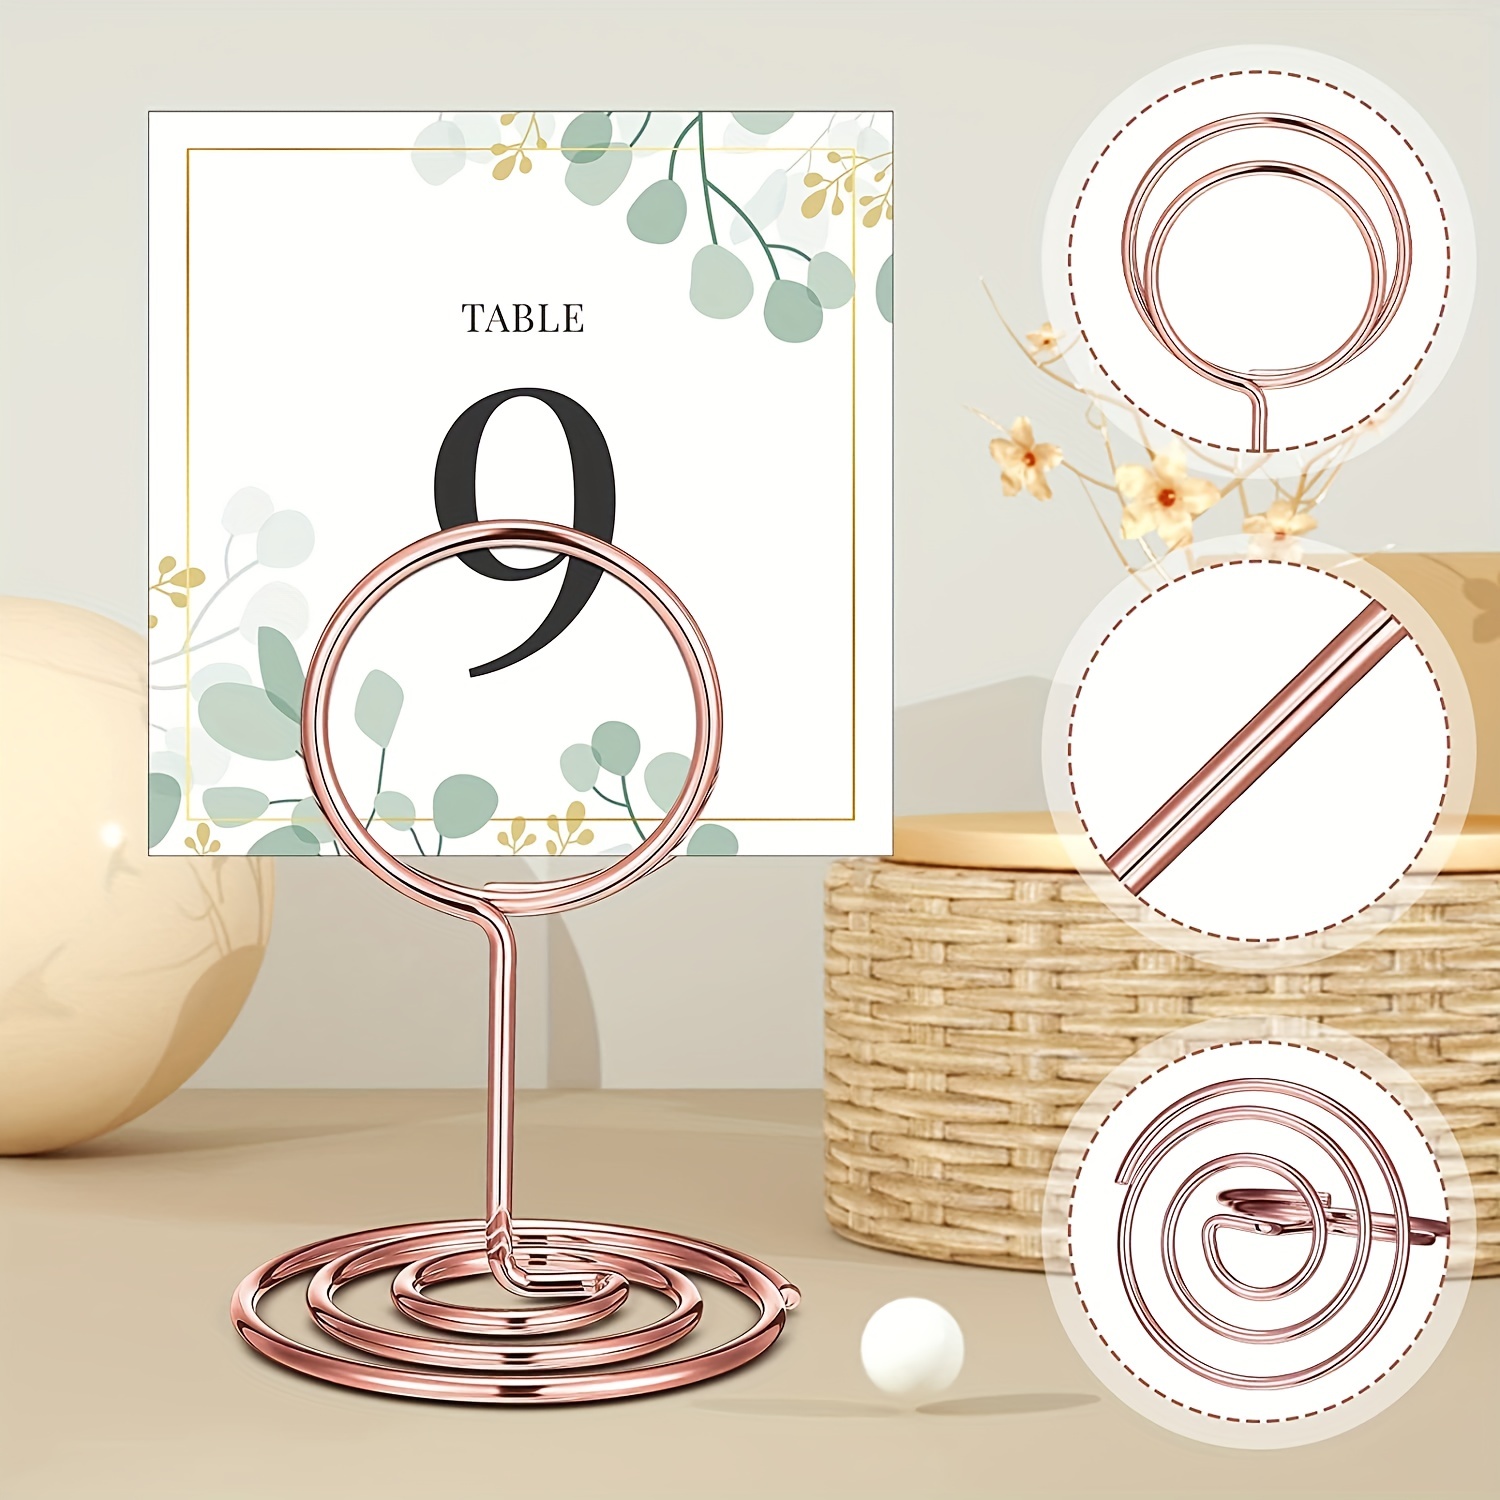 20pcs Mini Place Card Holders, Cute Table Number Holders, Classy Table Card  Holder Table Picture Stands, Elegant Wire Photo Holder Menu Memo Clips, Id